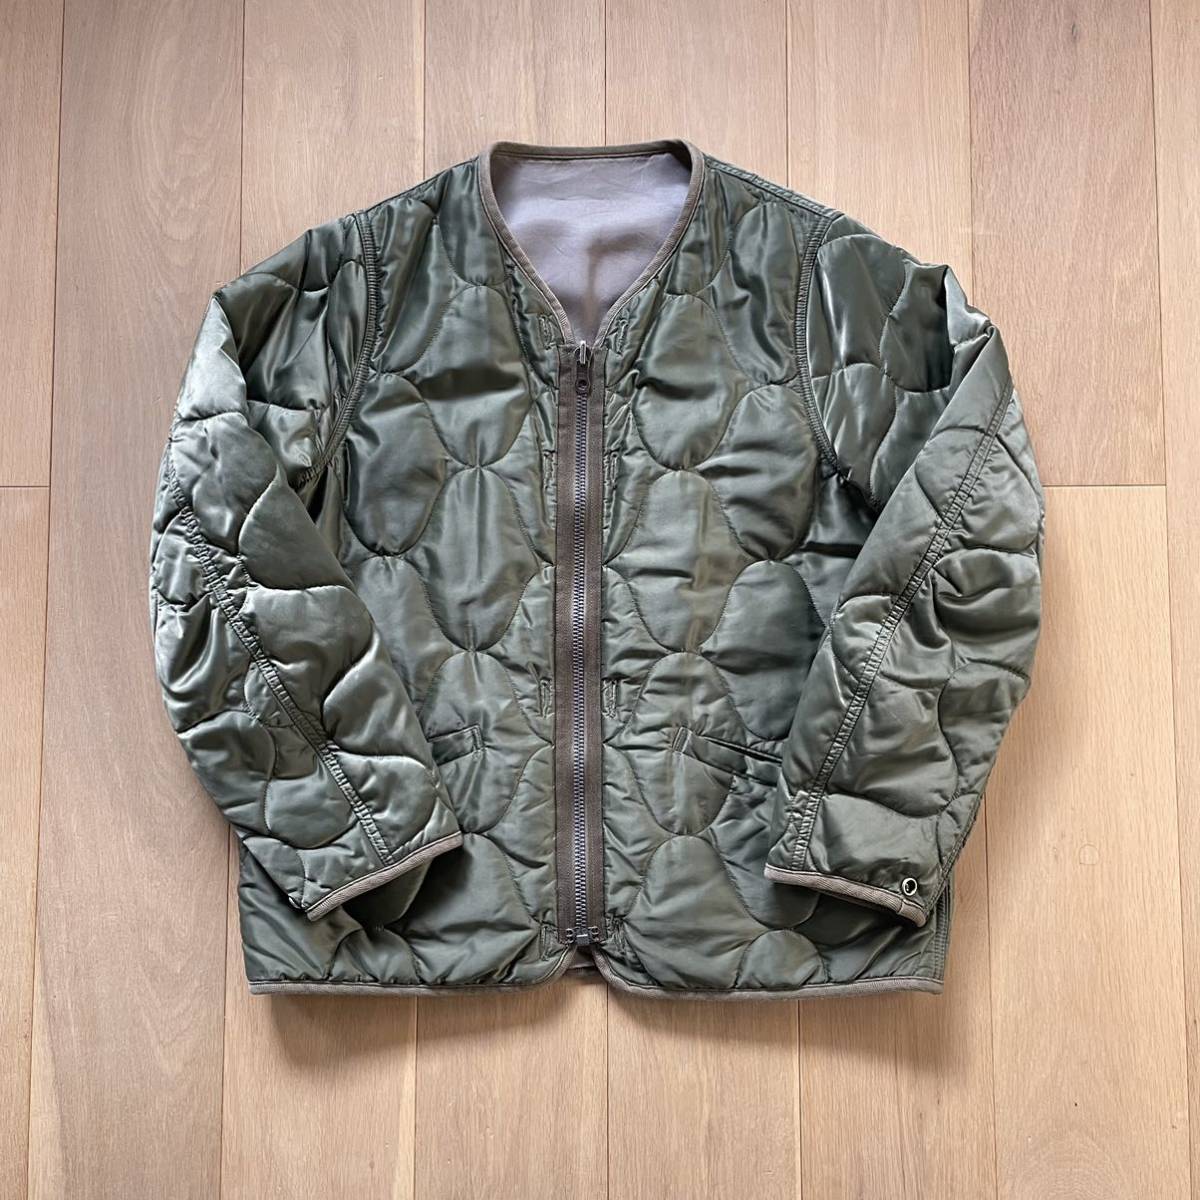 VISVIM 19AW IRIS LINER JACKET OLIVE 2 product details | Yahoo! Auctions  Japan proxy bidding and shopping service | FROM JAPAN